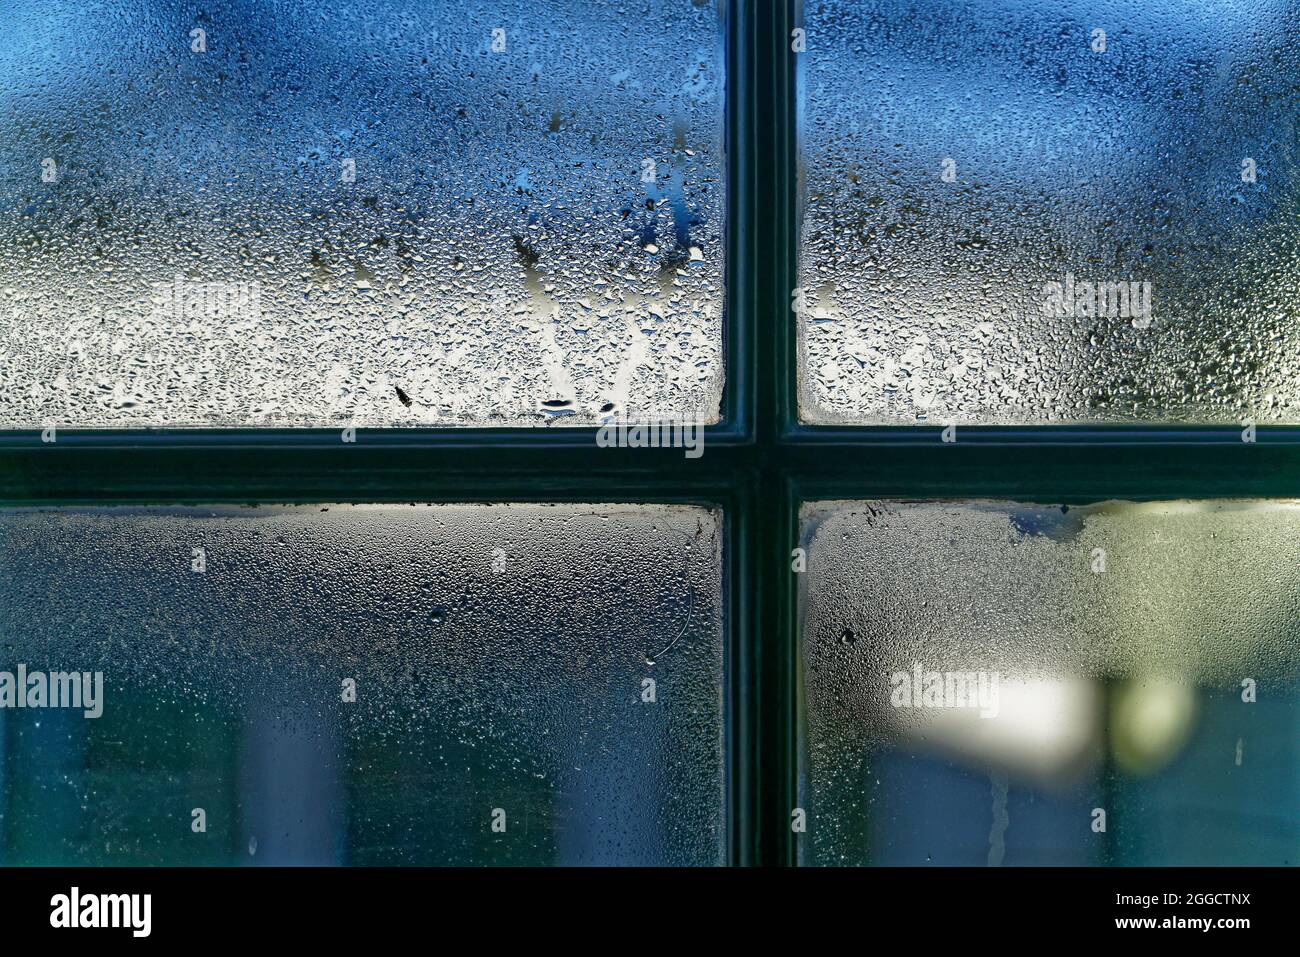 Condensation on the inside of a window in a cold damp house. Stock Photo